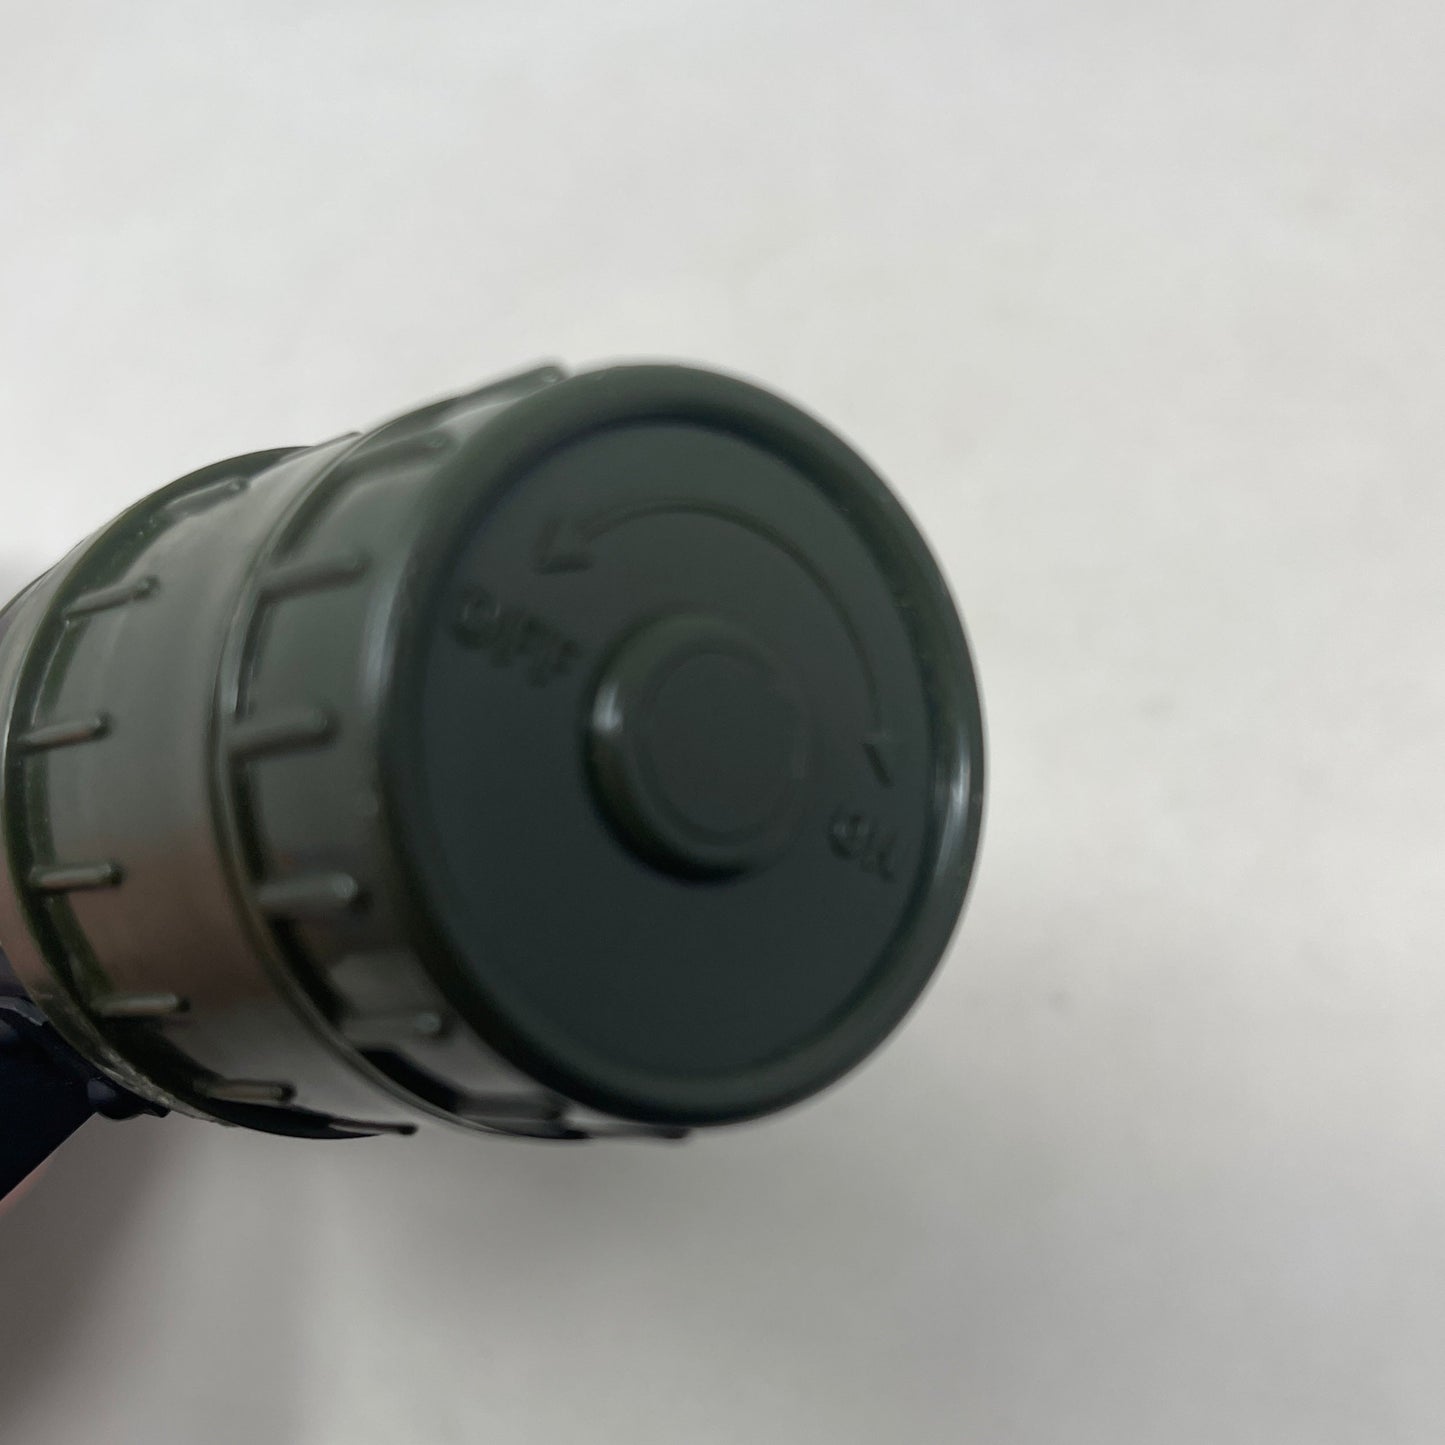 British Army Magnifying Torch For Reading Maps